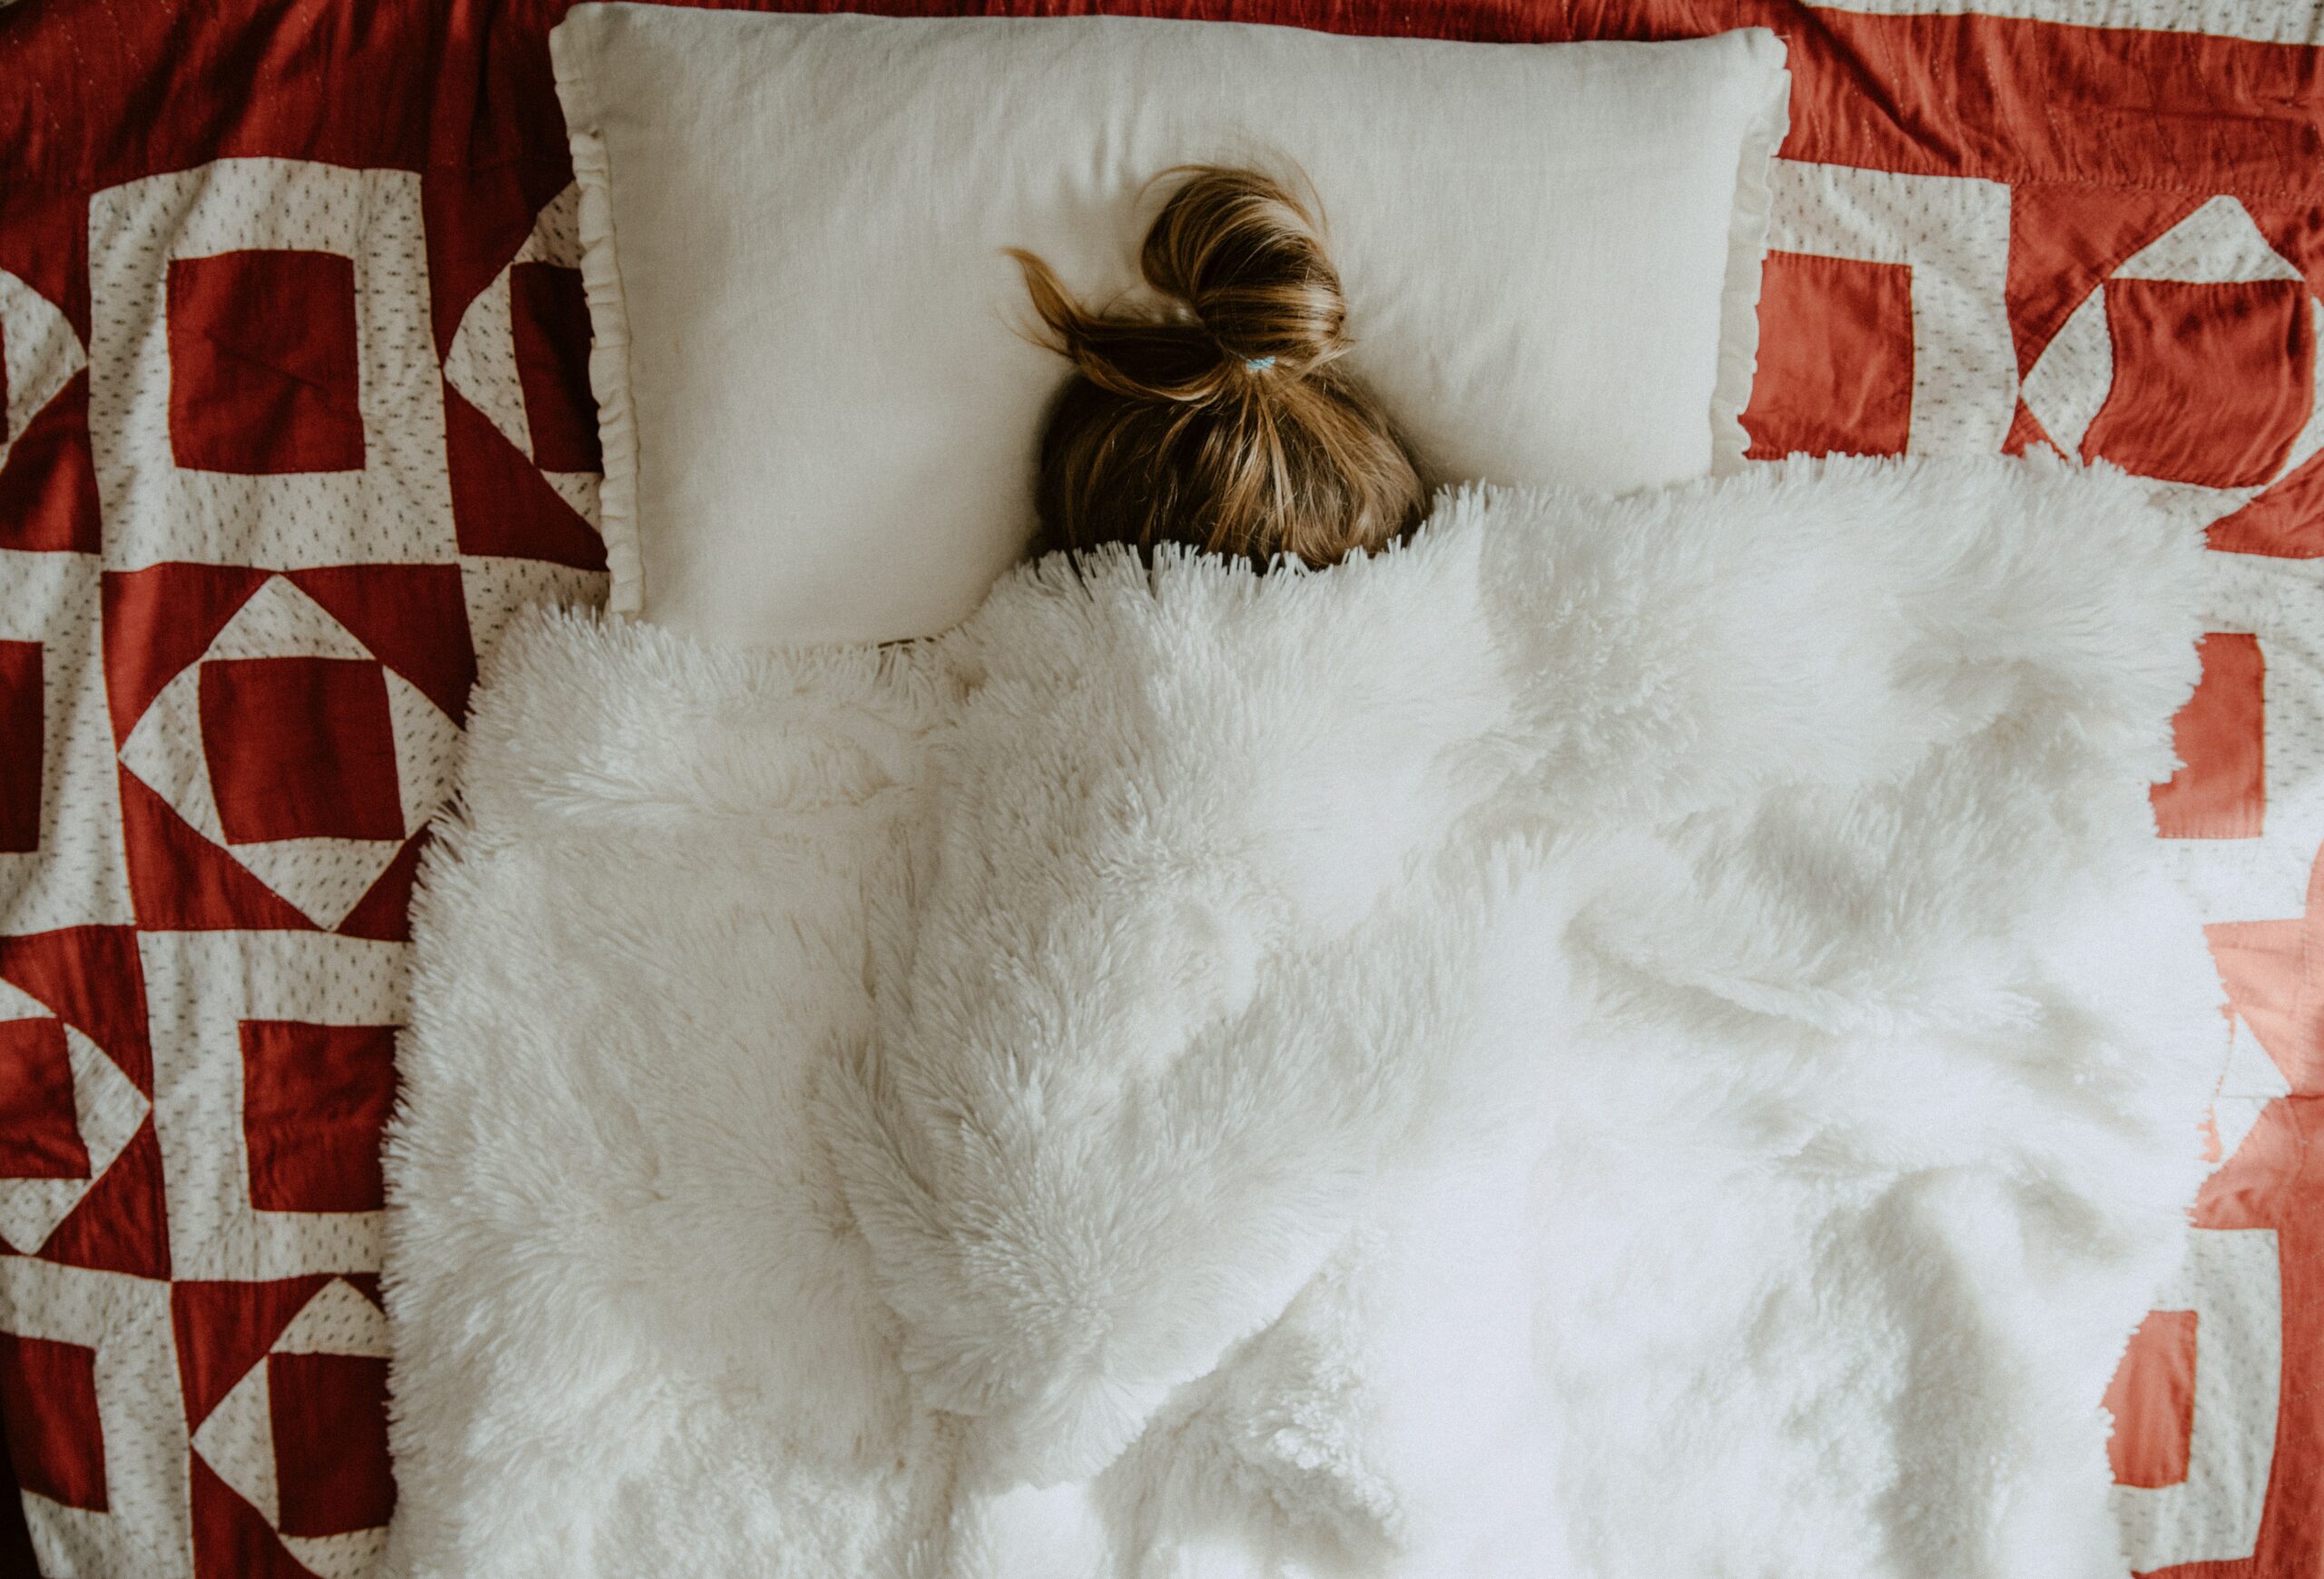 Myths of Bedding Hygiene - Your Pillow Could Be Making You Sick - FR  Systems International